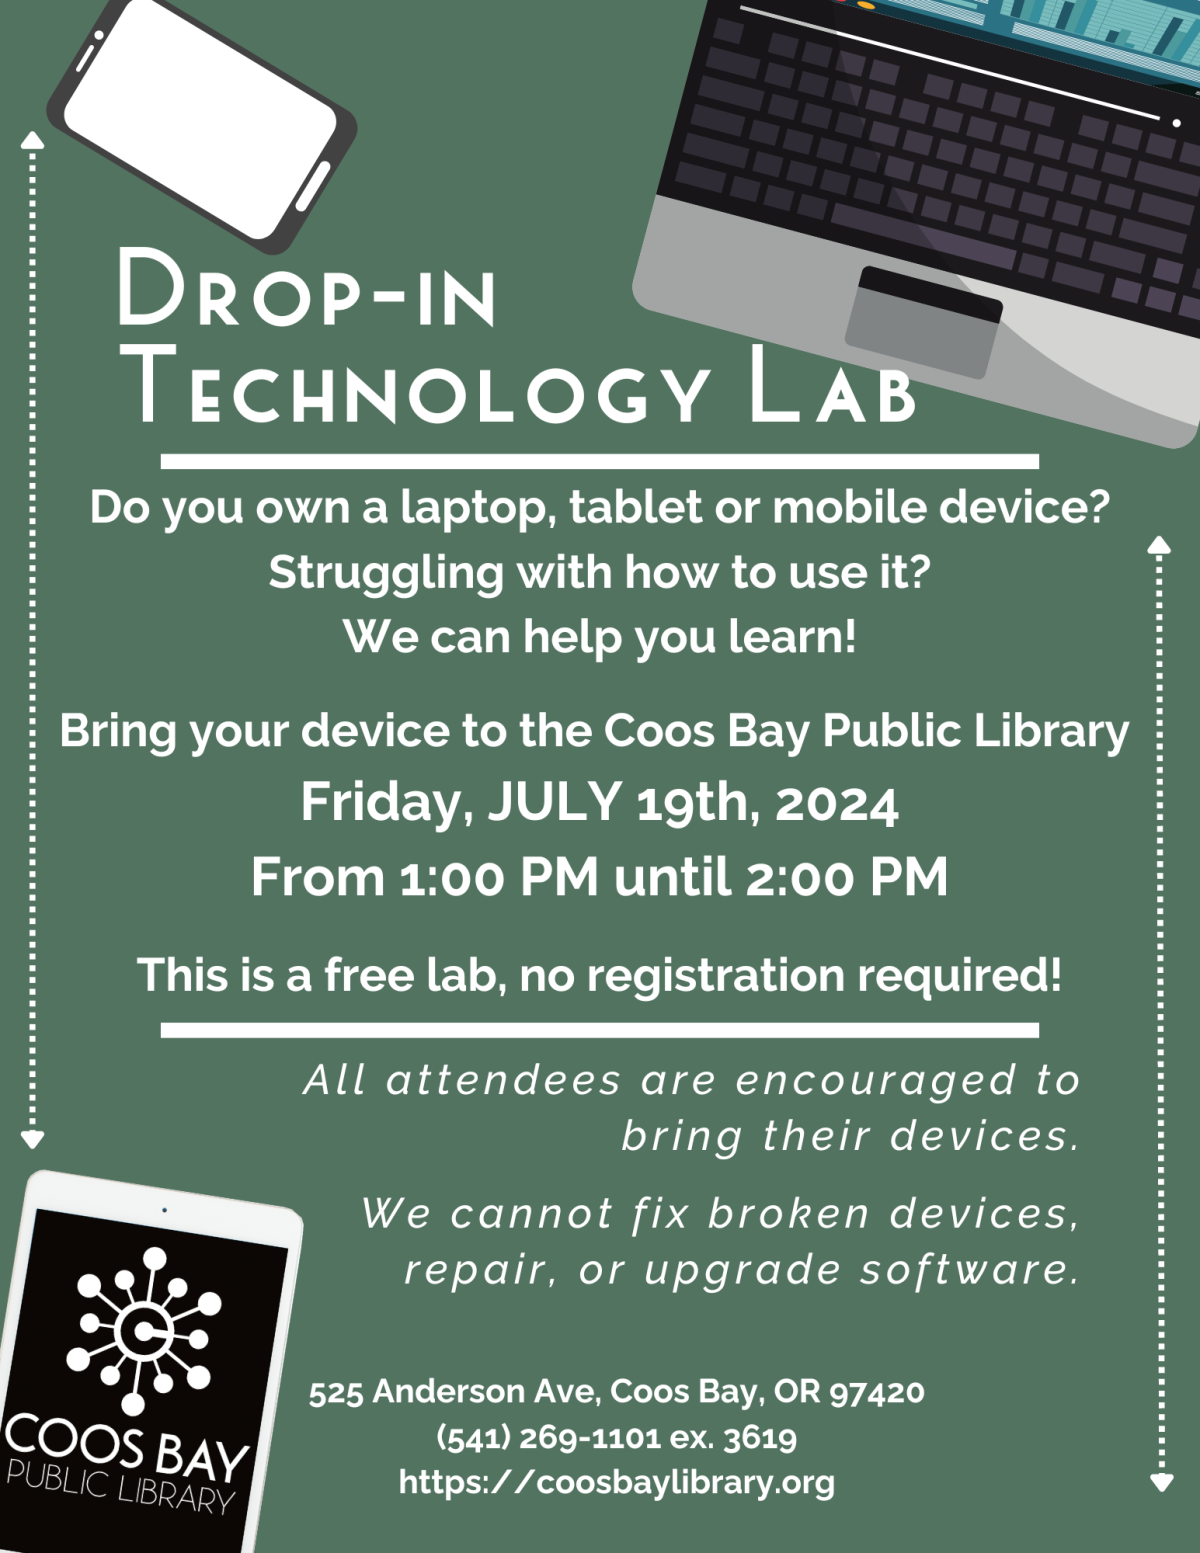 Drop-in Tech Lab on July 19th from 1:00 pm